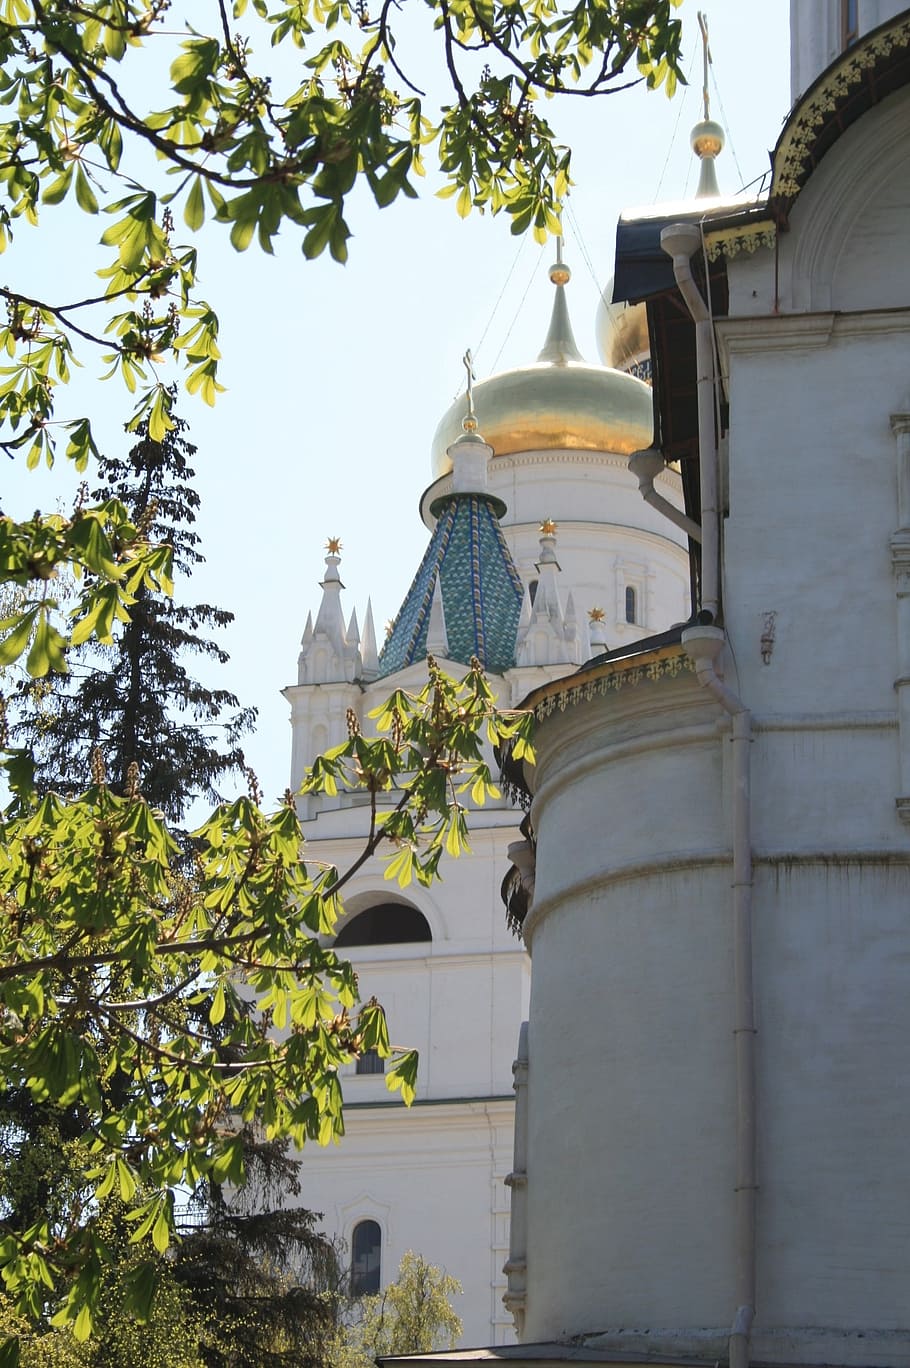 kremlin, church square, white walls, domes, green trees, spring, sky, golden dome, bell tower, tent roof of the annexe